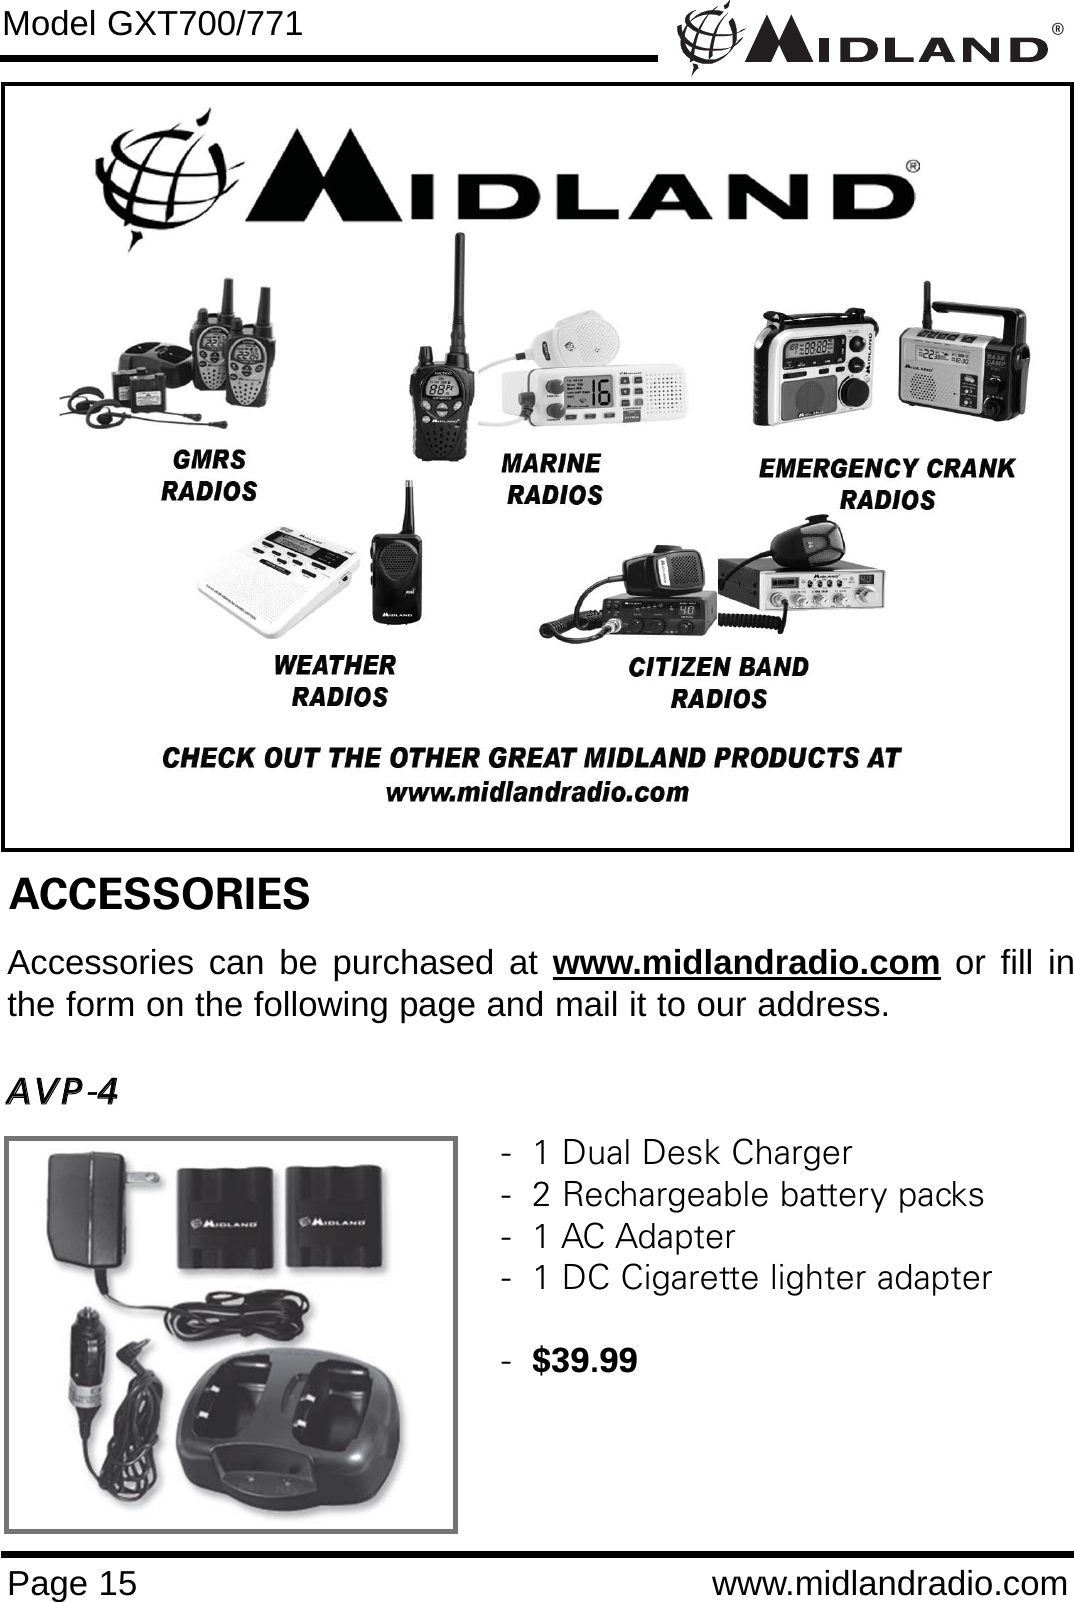 ®Page 15 www.midlandradio.comModel GXT700/771ACCESSORIESAccessories can be purchased at www.midlandradio.com or fill inthe form on the following page and mail it to our address.AAVVPP-44-  1 Dual Desk Charger-  2 Rechargeable battery packs-  1 AC Adapter-  1 DC Cigarette lighter adapter-  $39.99